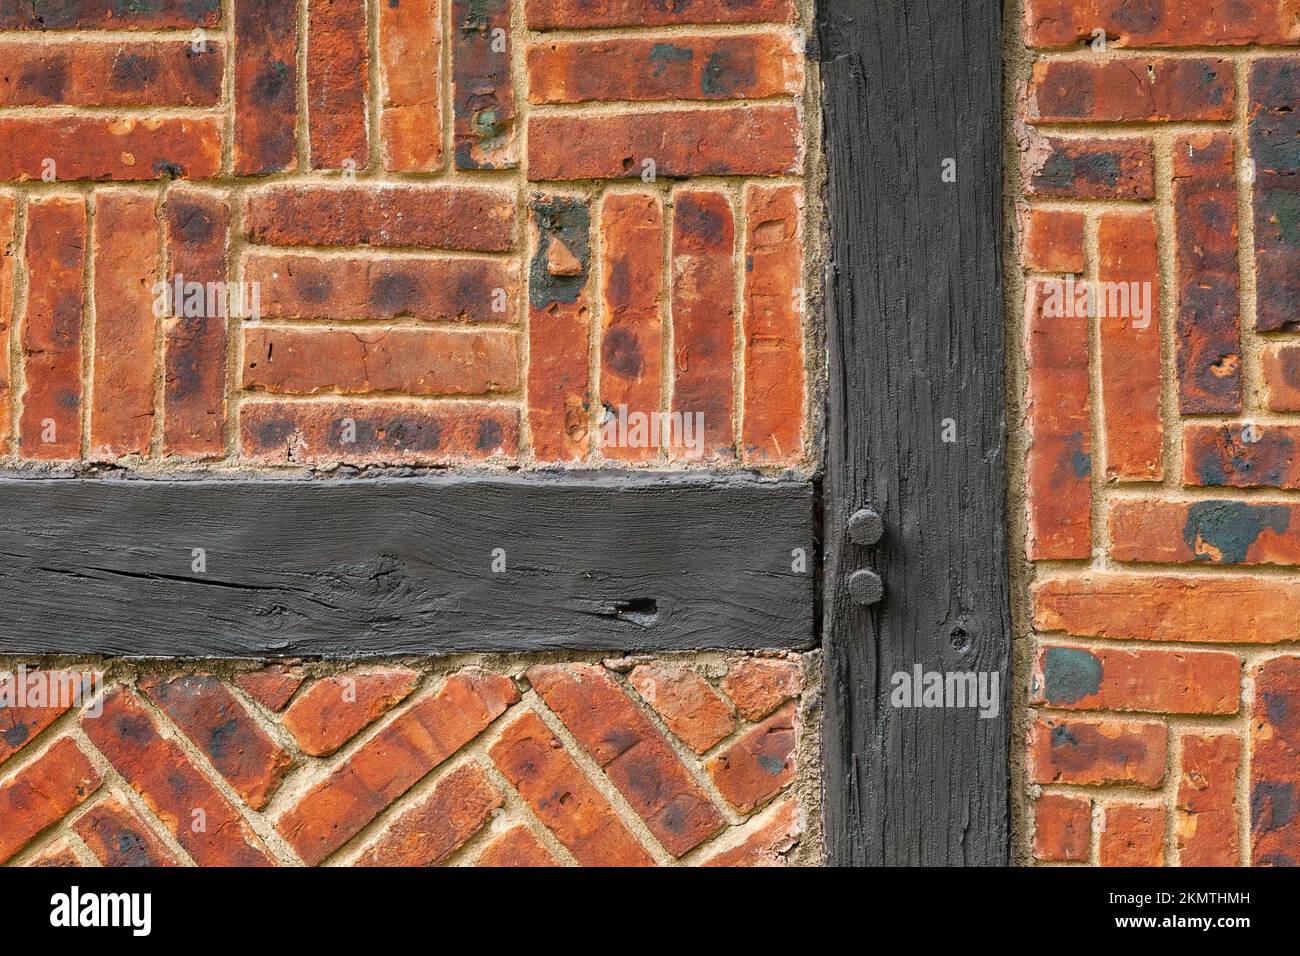 Wooden beams and brick pattern, Avon, Connecticut Stock Photo